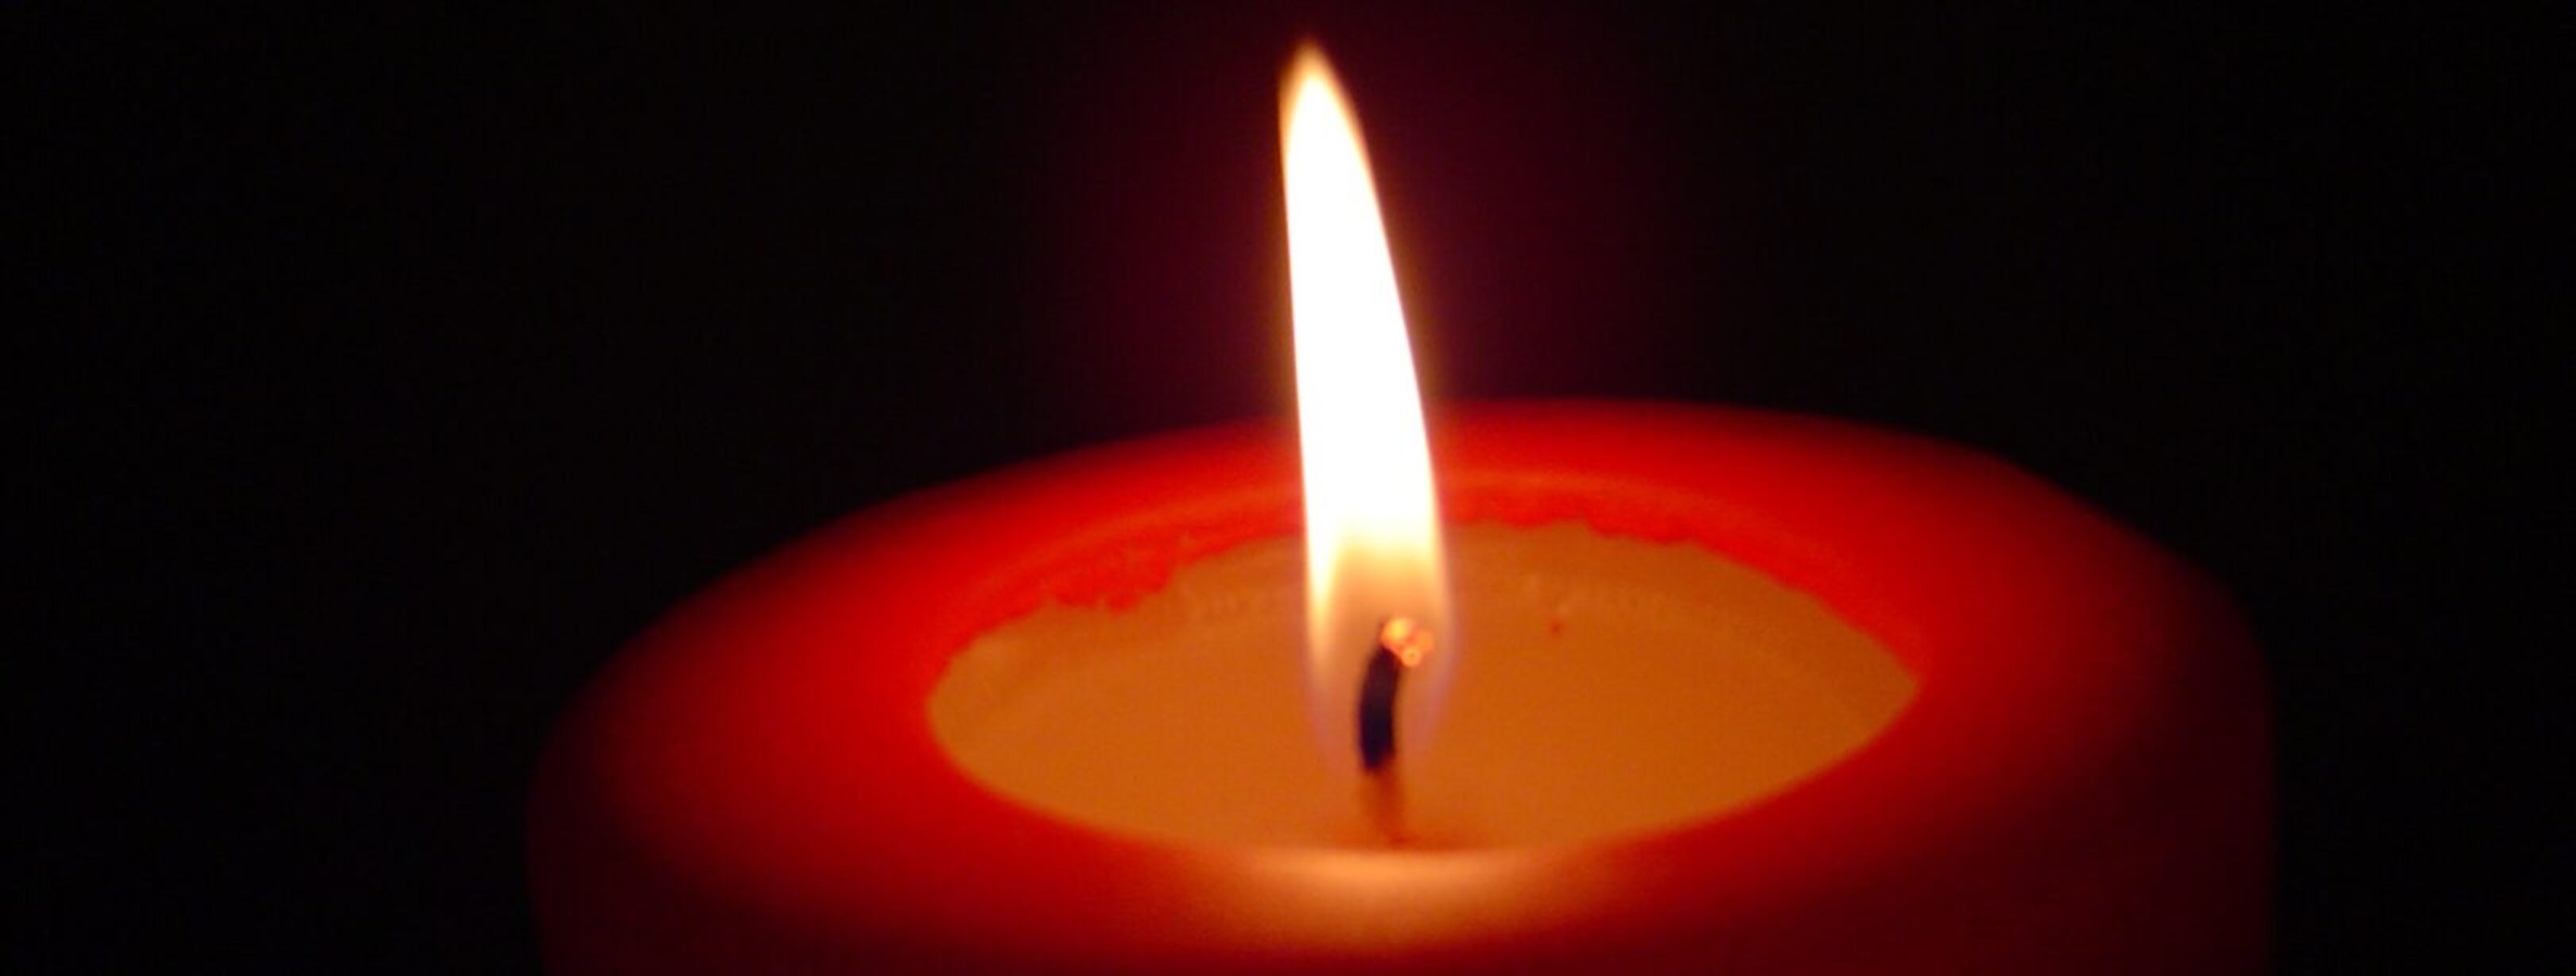 1620-Burning Candle_by Gerard’s world_via Flickr